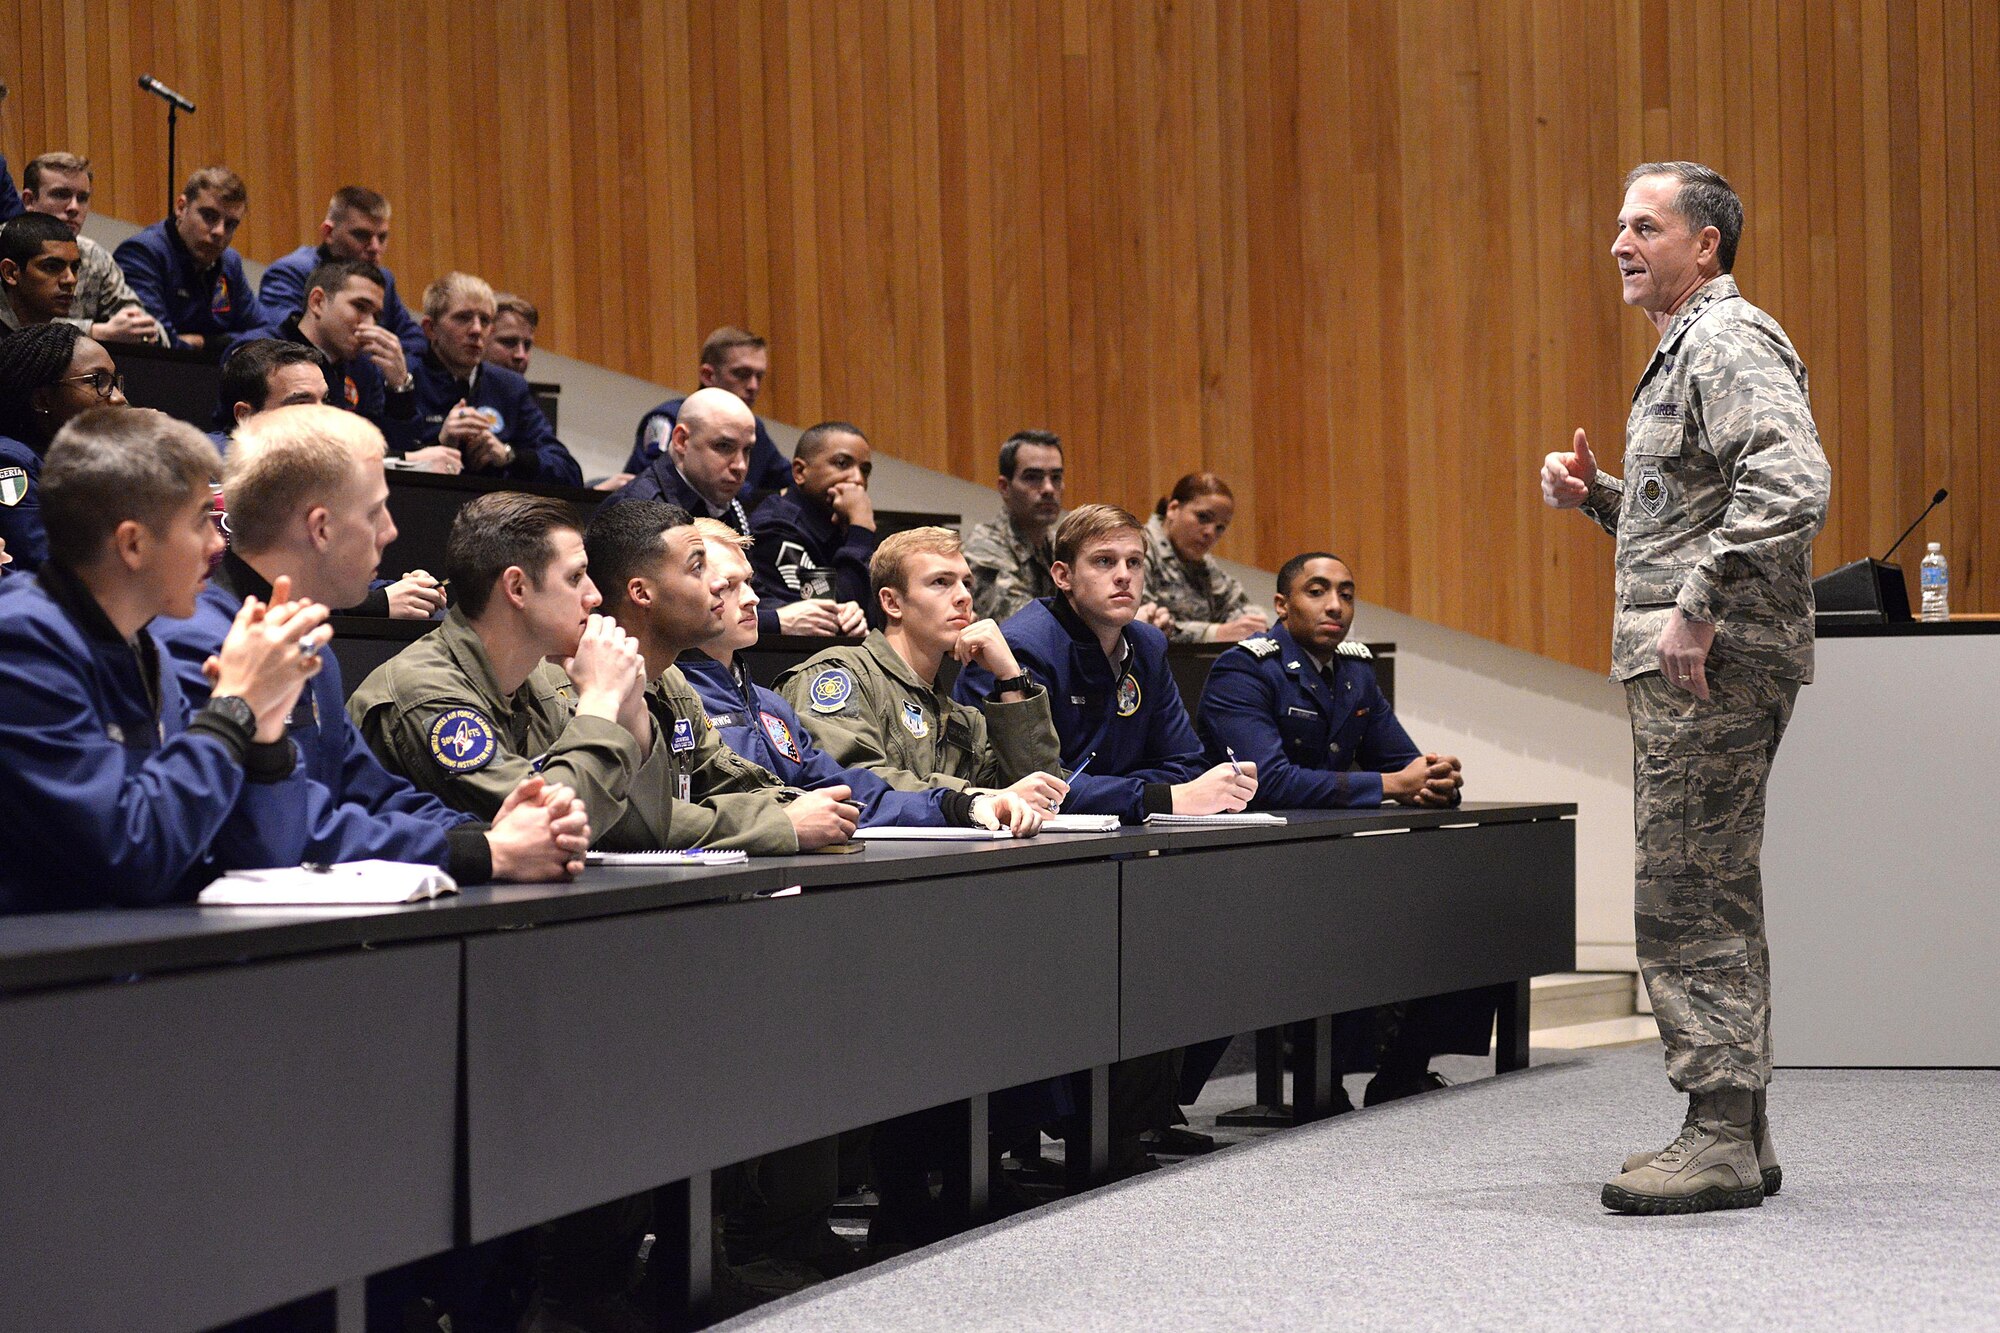 Air Force Vice Chief of Staff Gen. David Goldfein discusses the
value of commitment to a higher cause with a group of senior leaders and cadets at the U.S. Air Force Academy Jan. 27, 2016. Gen. Goldfien hosted two large group discussions for Total Force Airmen and cadets where he spoke on commitment and the high demand for their special talents. (U.S. Air Force
photo/Mike Kaplan)

